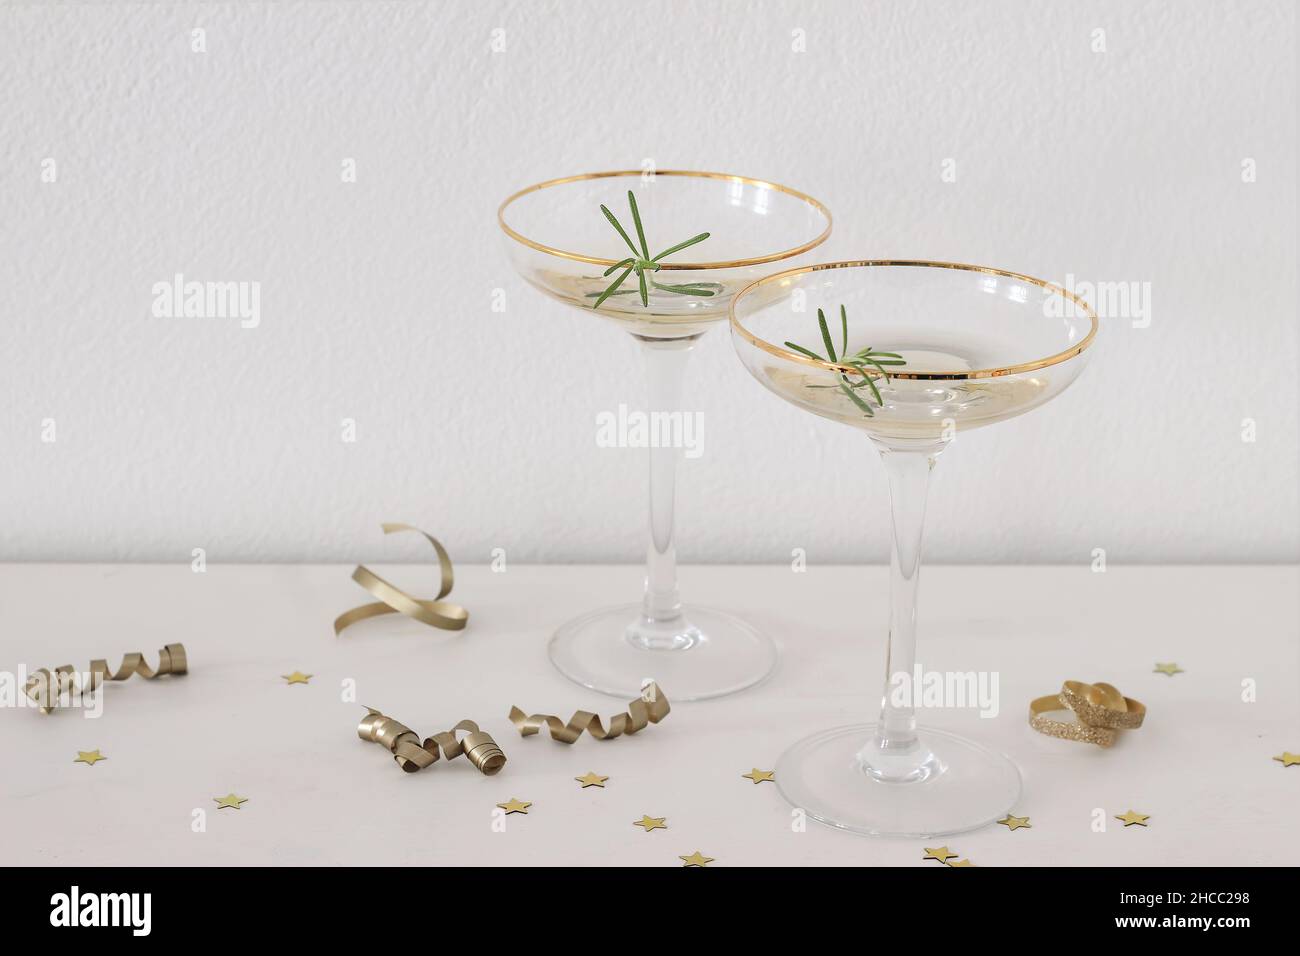 Happy New Year composition. Two champagne wine glasses with golden rim and green rosemary. White table, golden confetti stars and drinks. Party Stock Photo